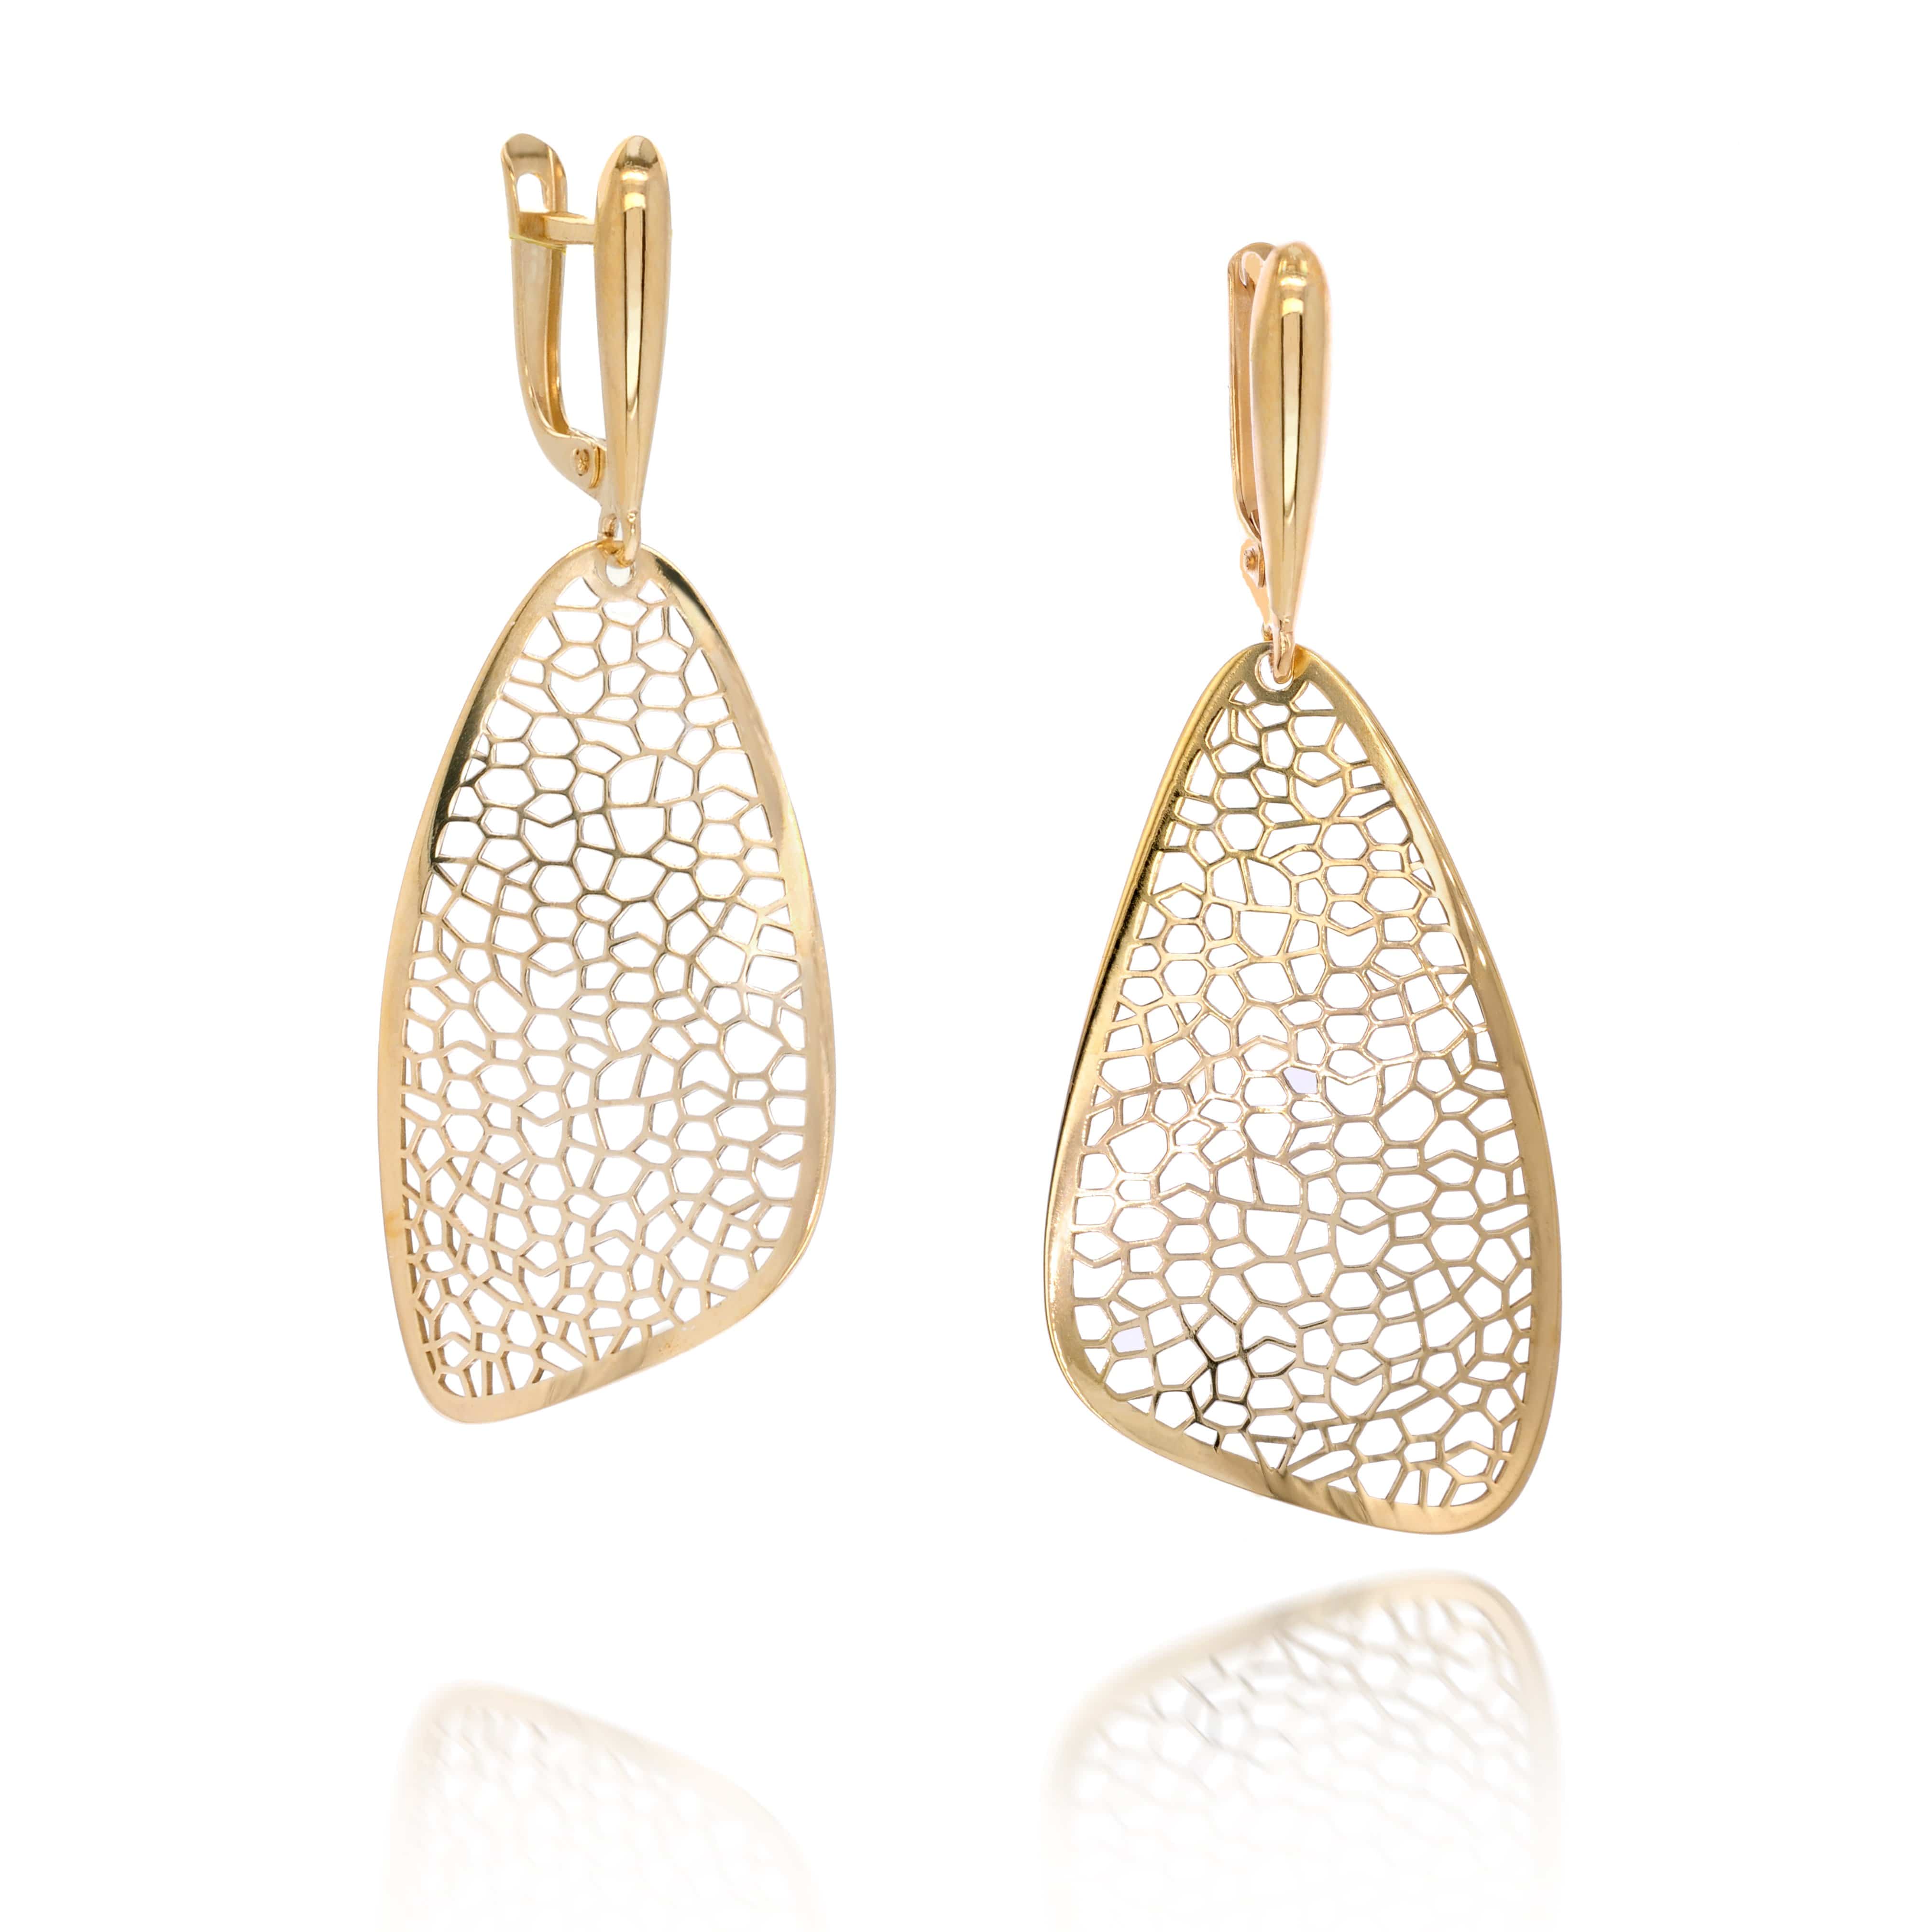 Lynora Jewellery Earring Yellow Gold Plate Tamburato Earrings Yellow Gold Plate